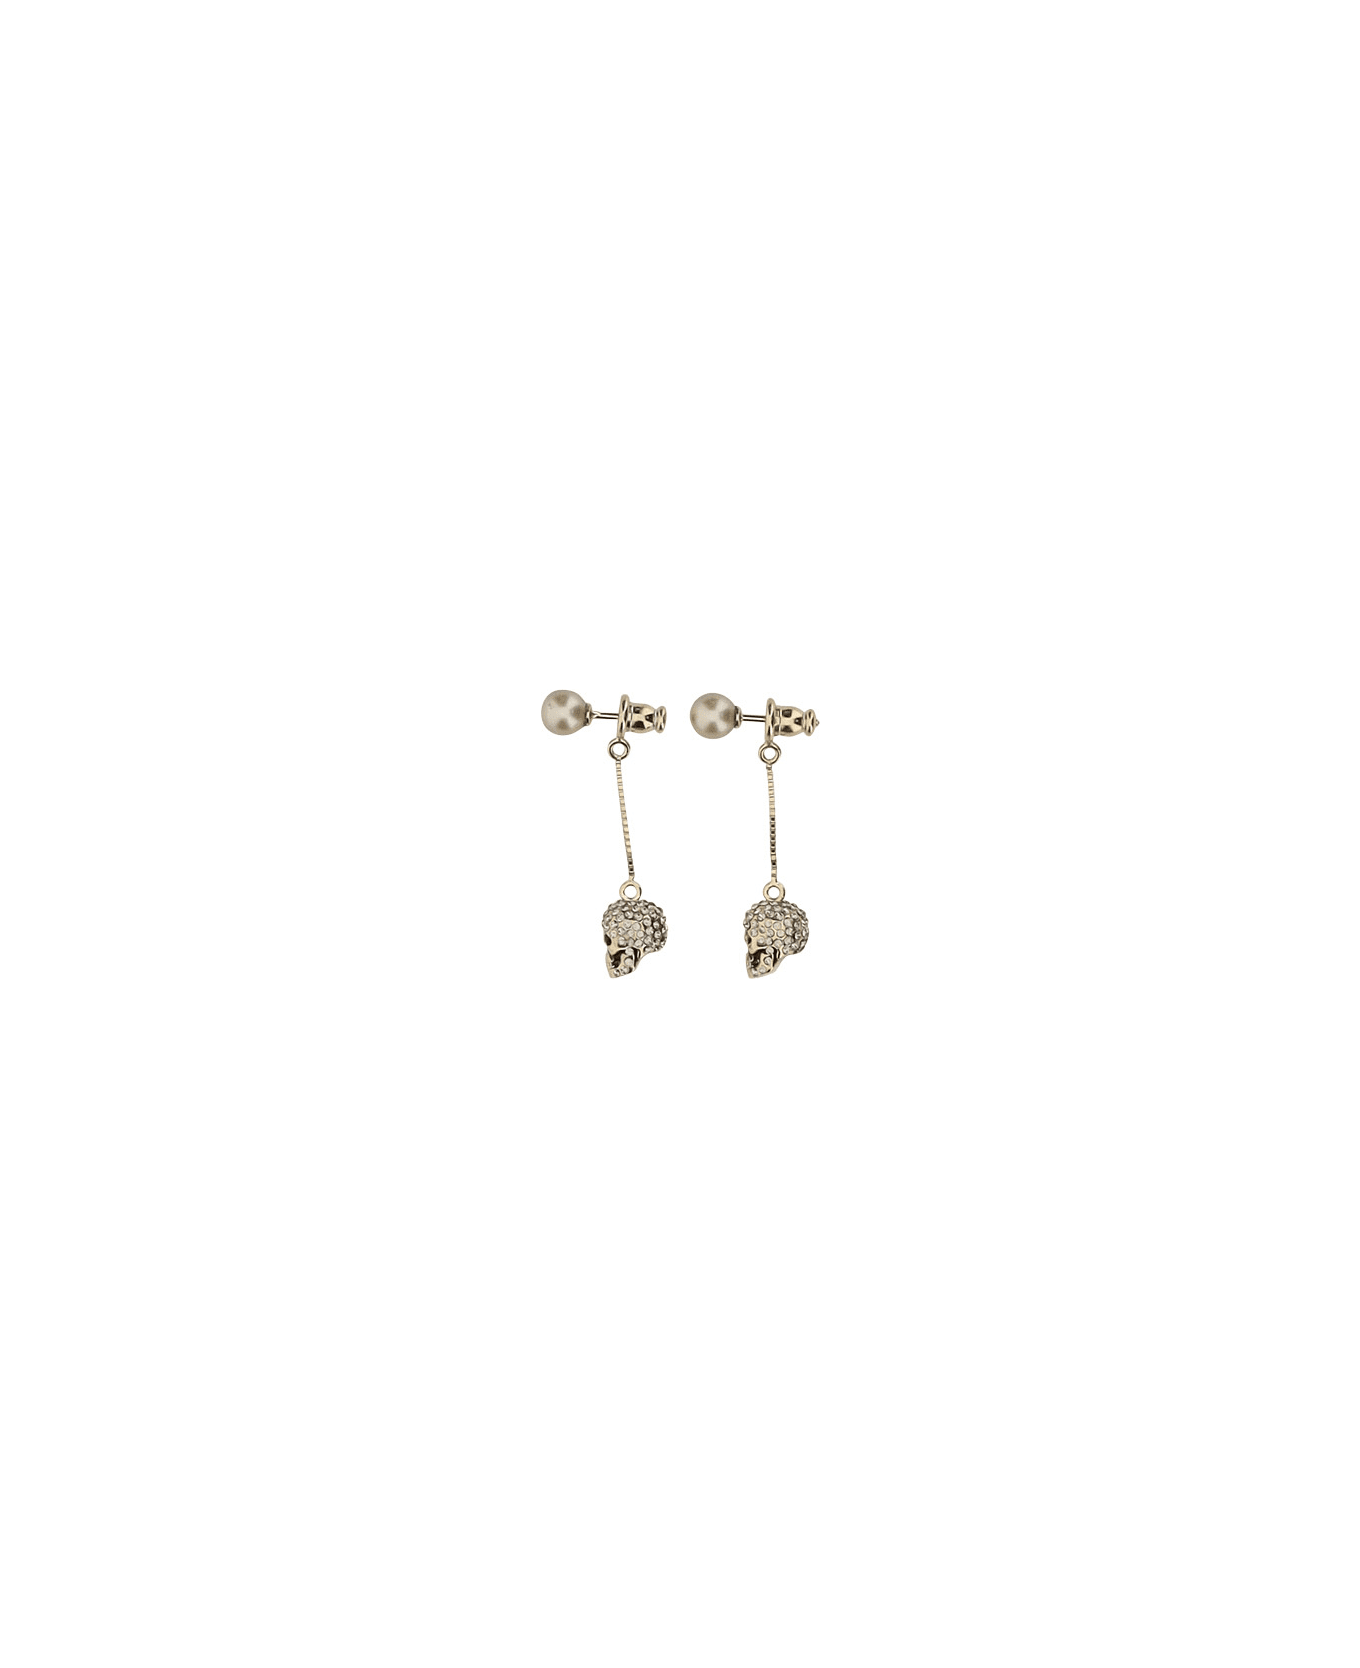 Alexander McQueen Skull Earrings With Pave' And Chain - Oro イヤリング